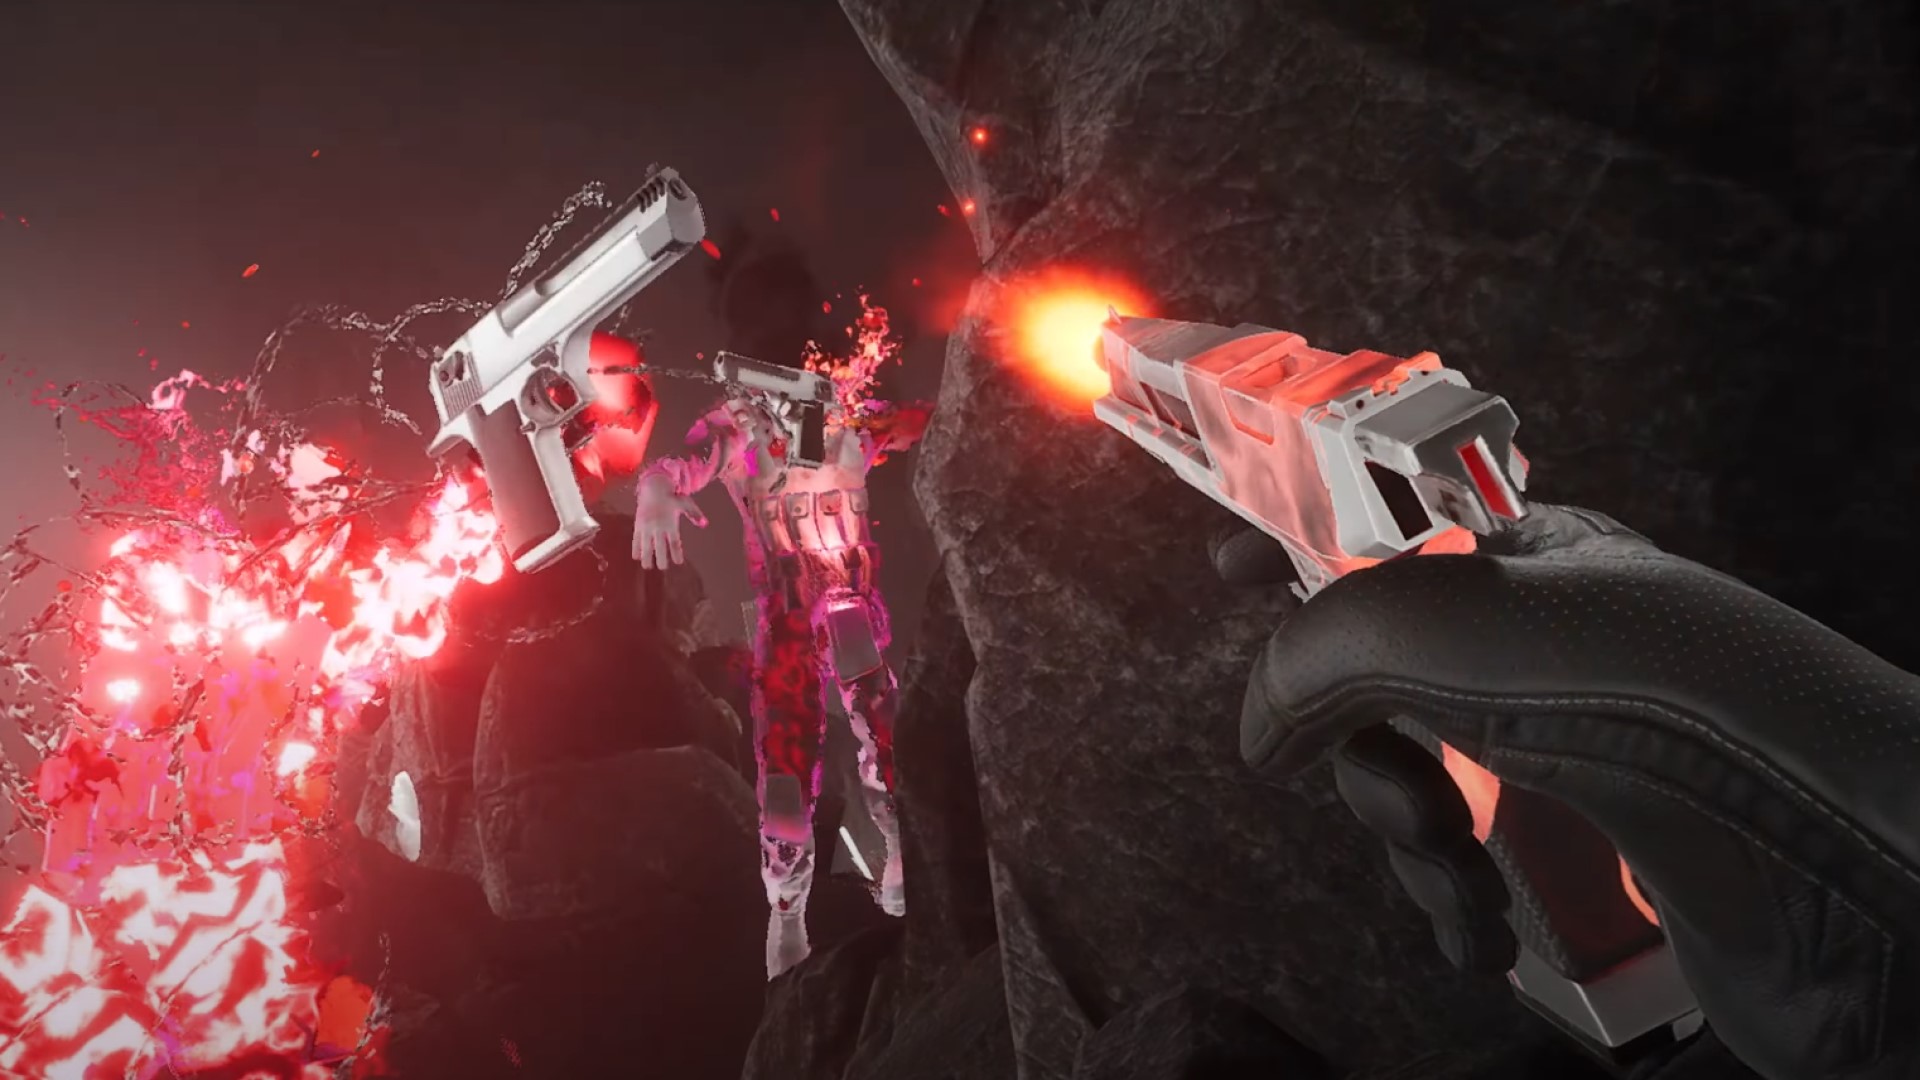 The player kills a pair of phantoms with rapid pistol shots